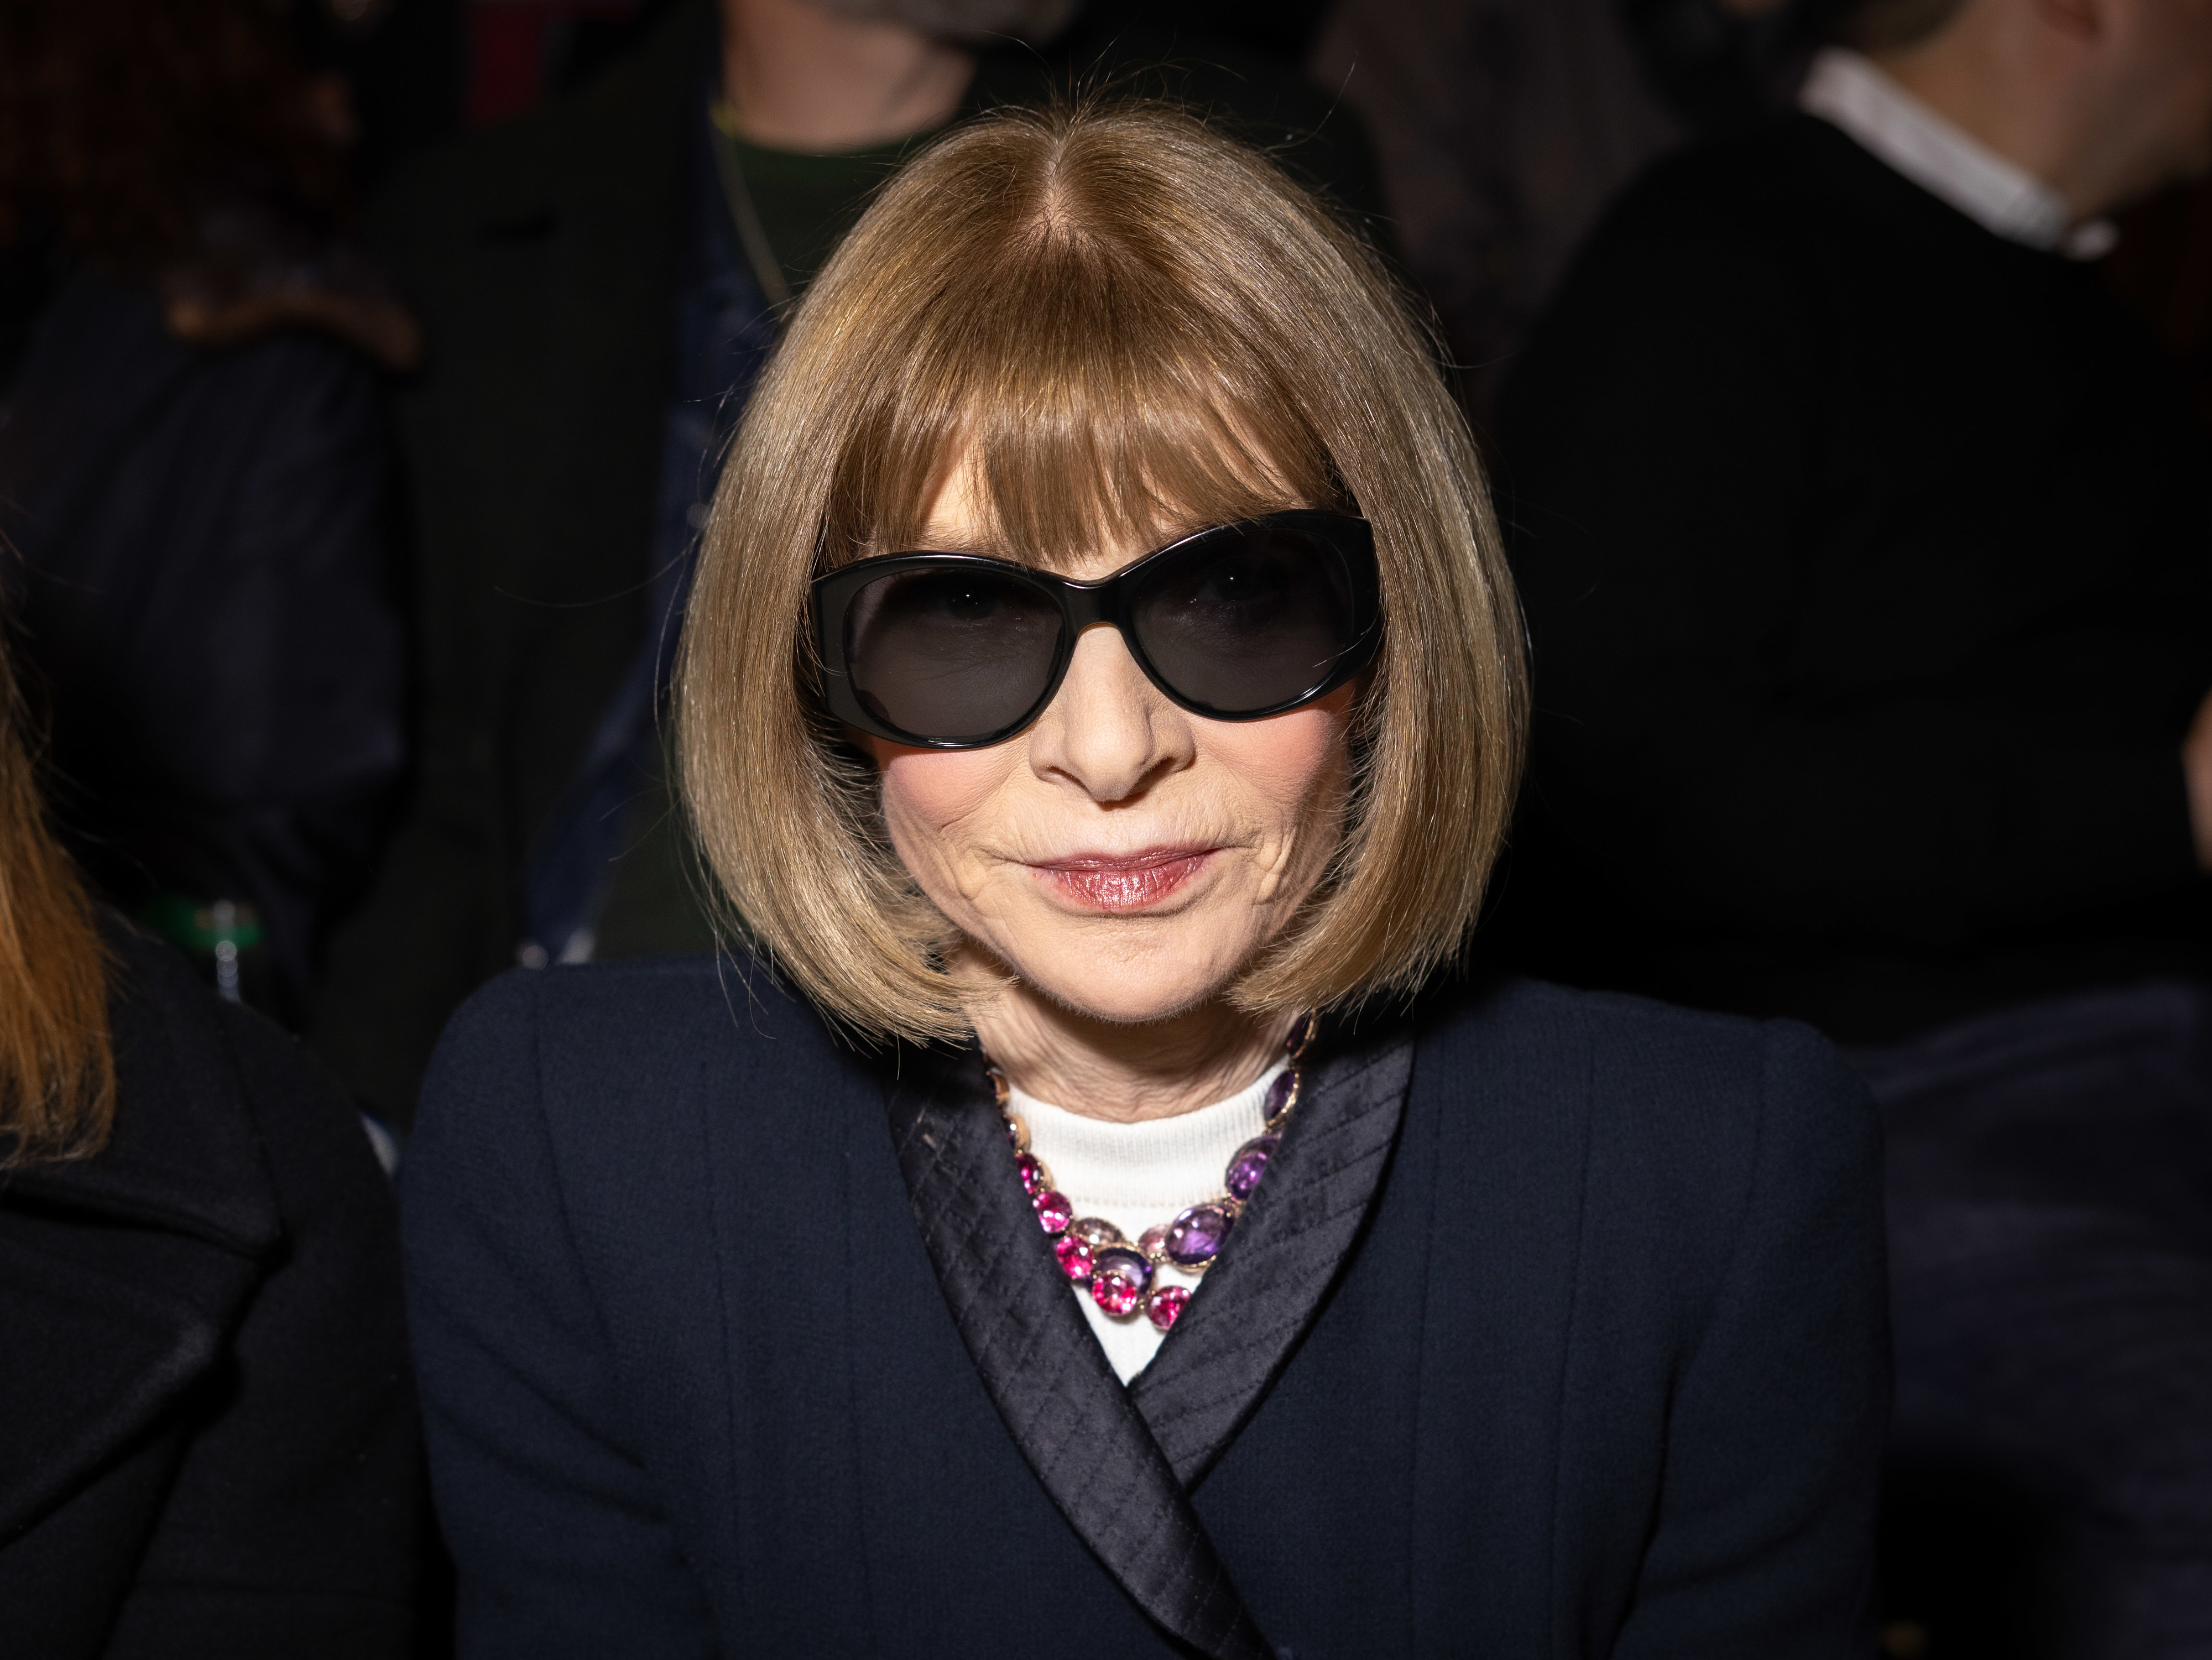 Anna Wintour in a dark jacket, statement necklace, rocking her signature bob hairstyle and sunglasses